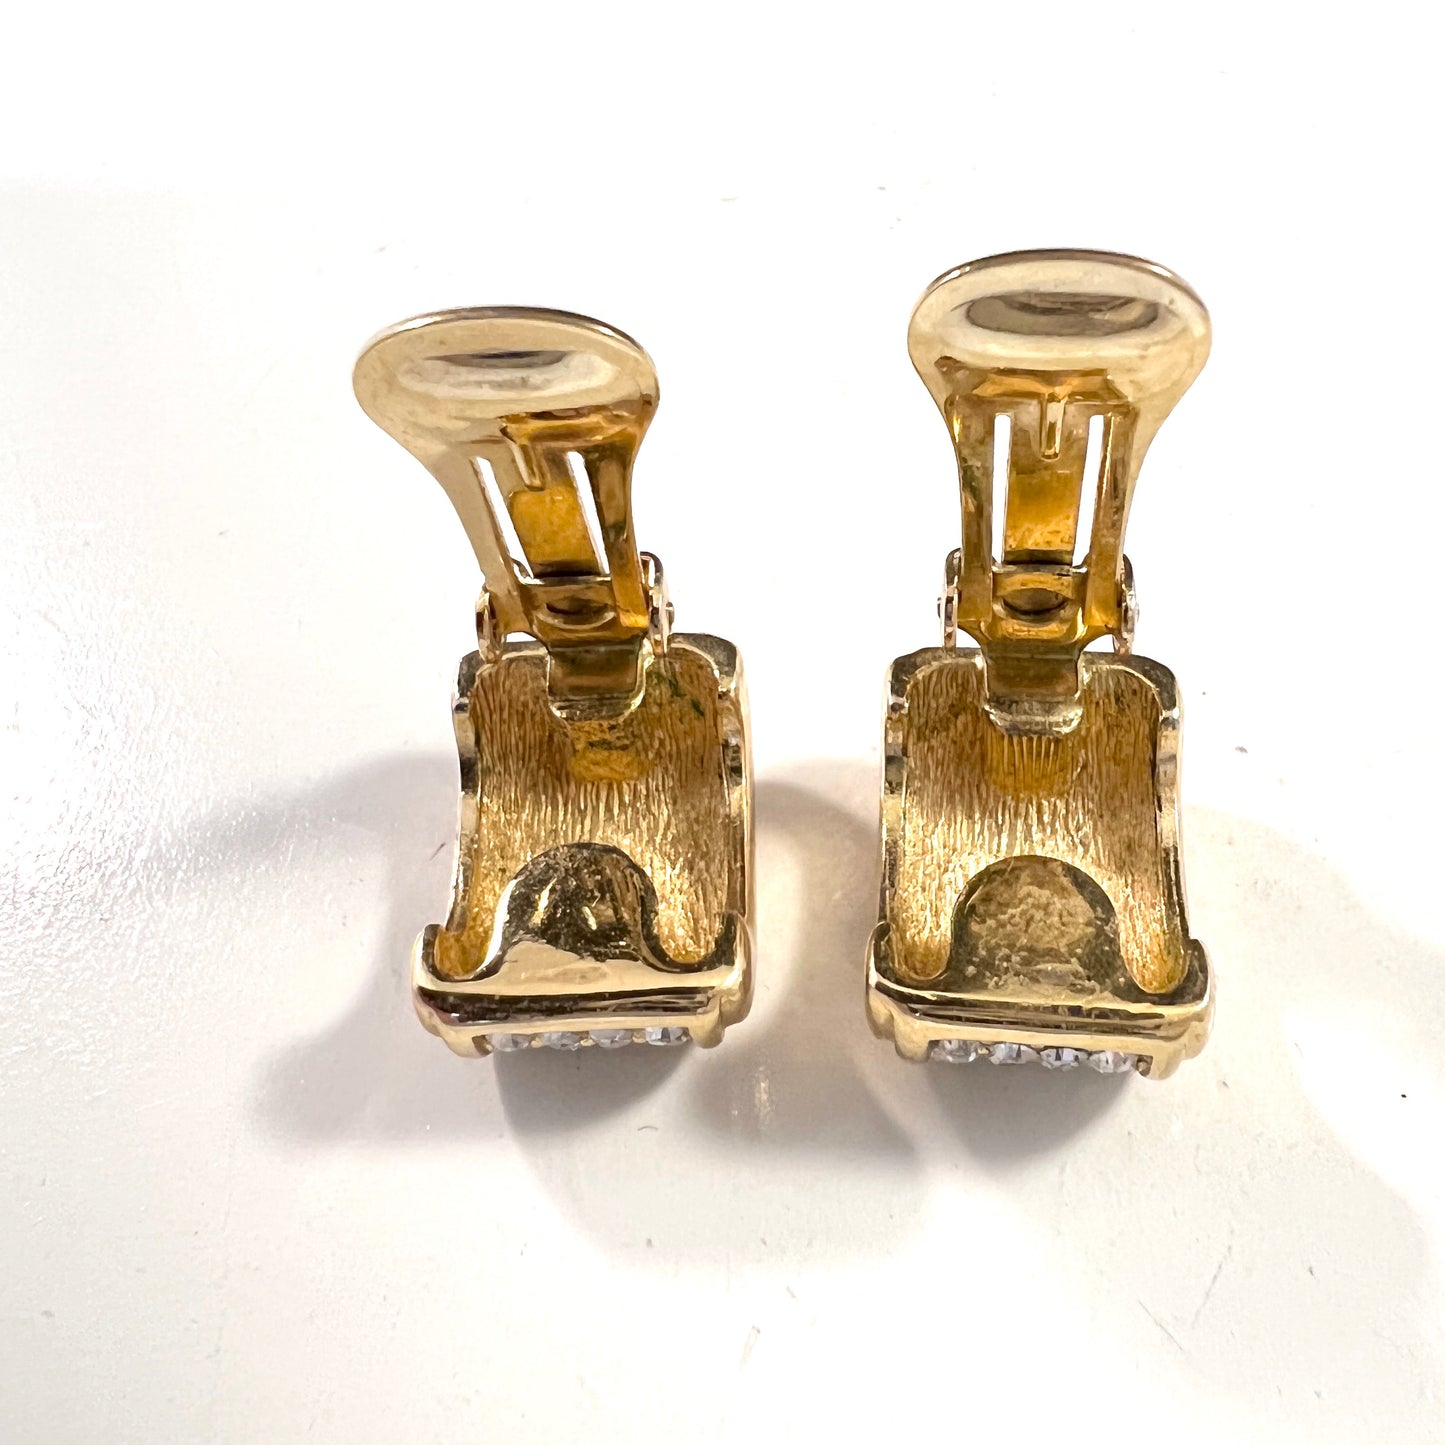 Christian Dior. Vintage Costume Jewelry Pair of Earrings.